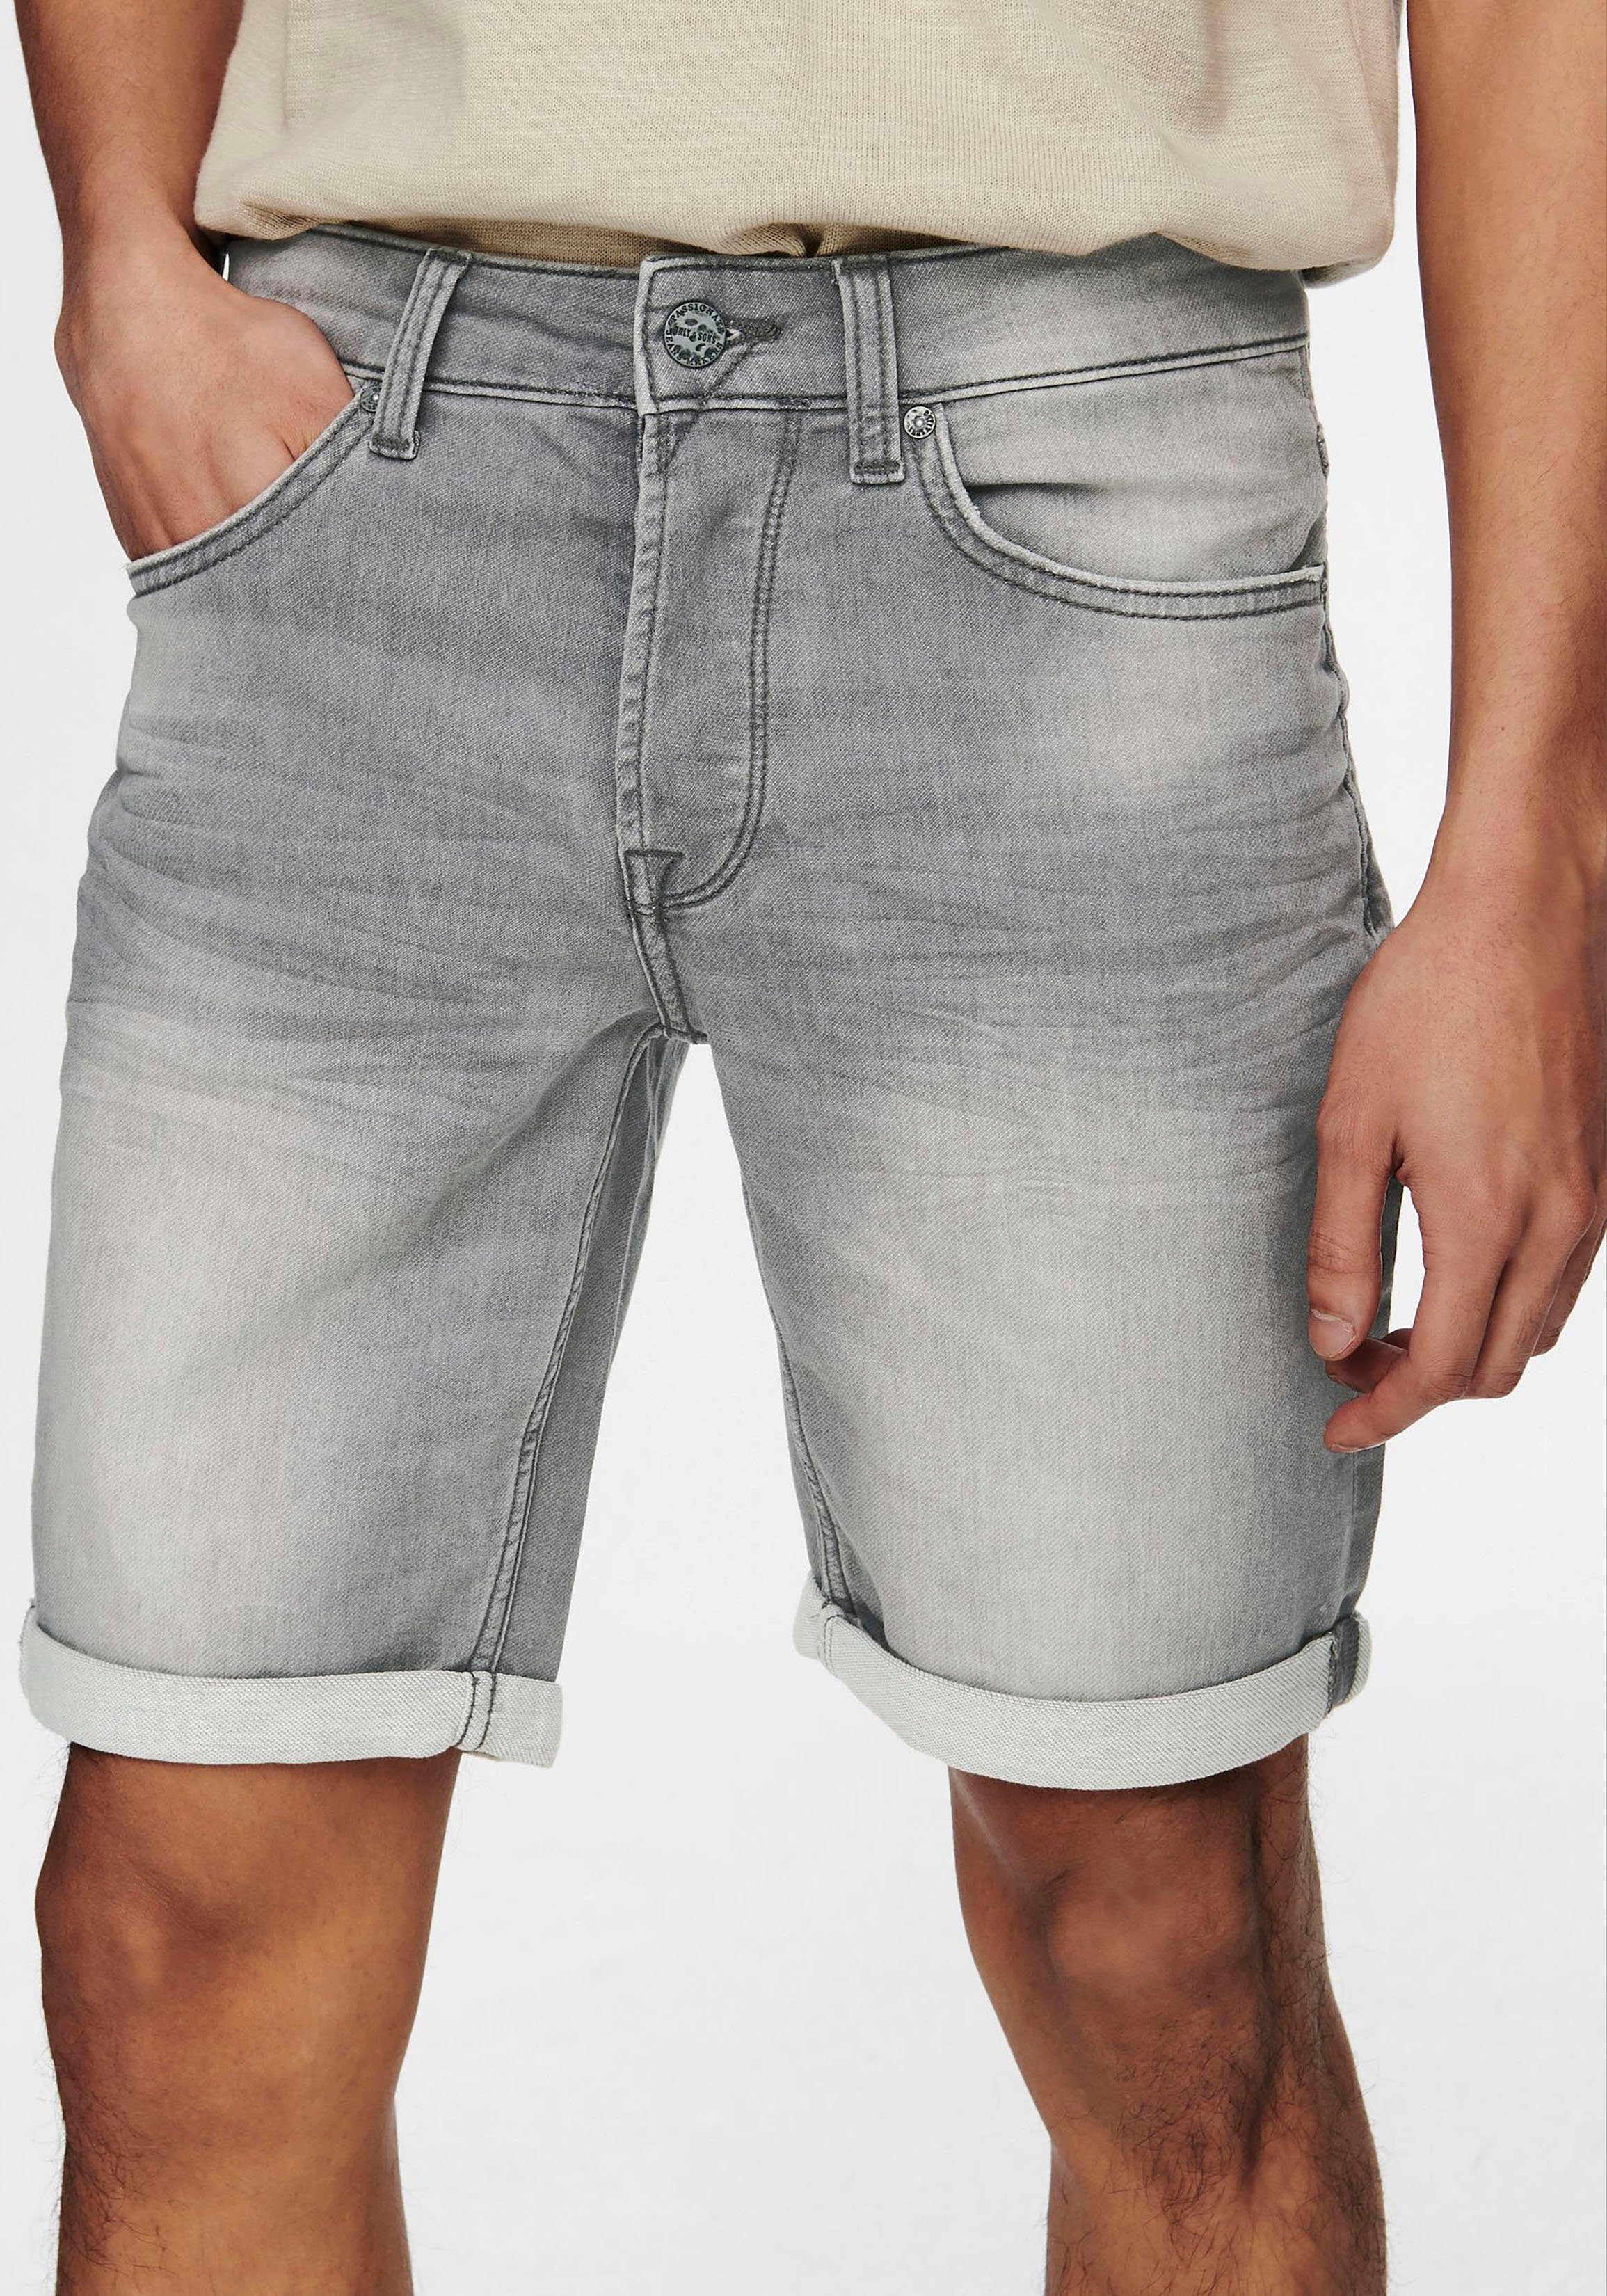 5189 ONSPLY Grey Jeansshorts NOOS ONLY SHORTS Denim LIGHT SONS DNM BLUE &